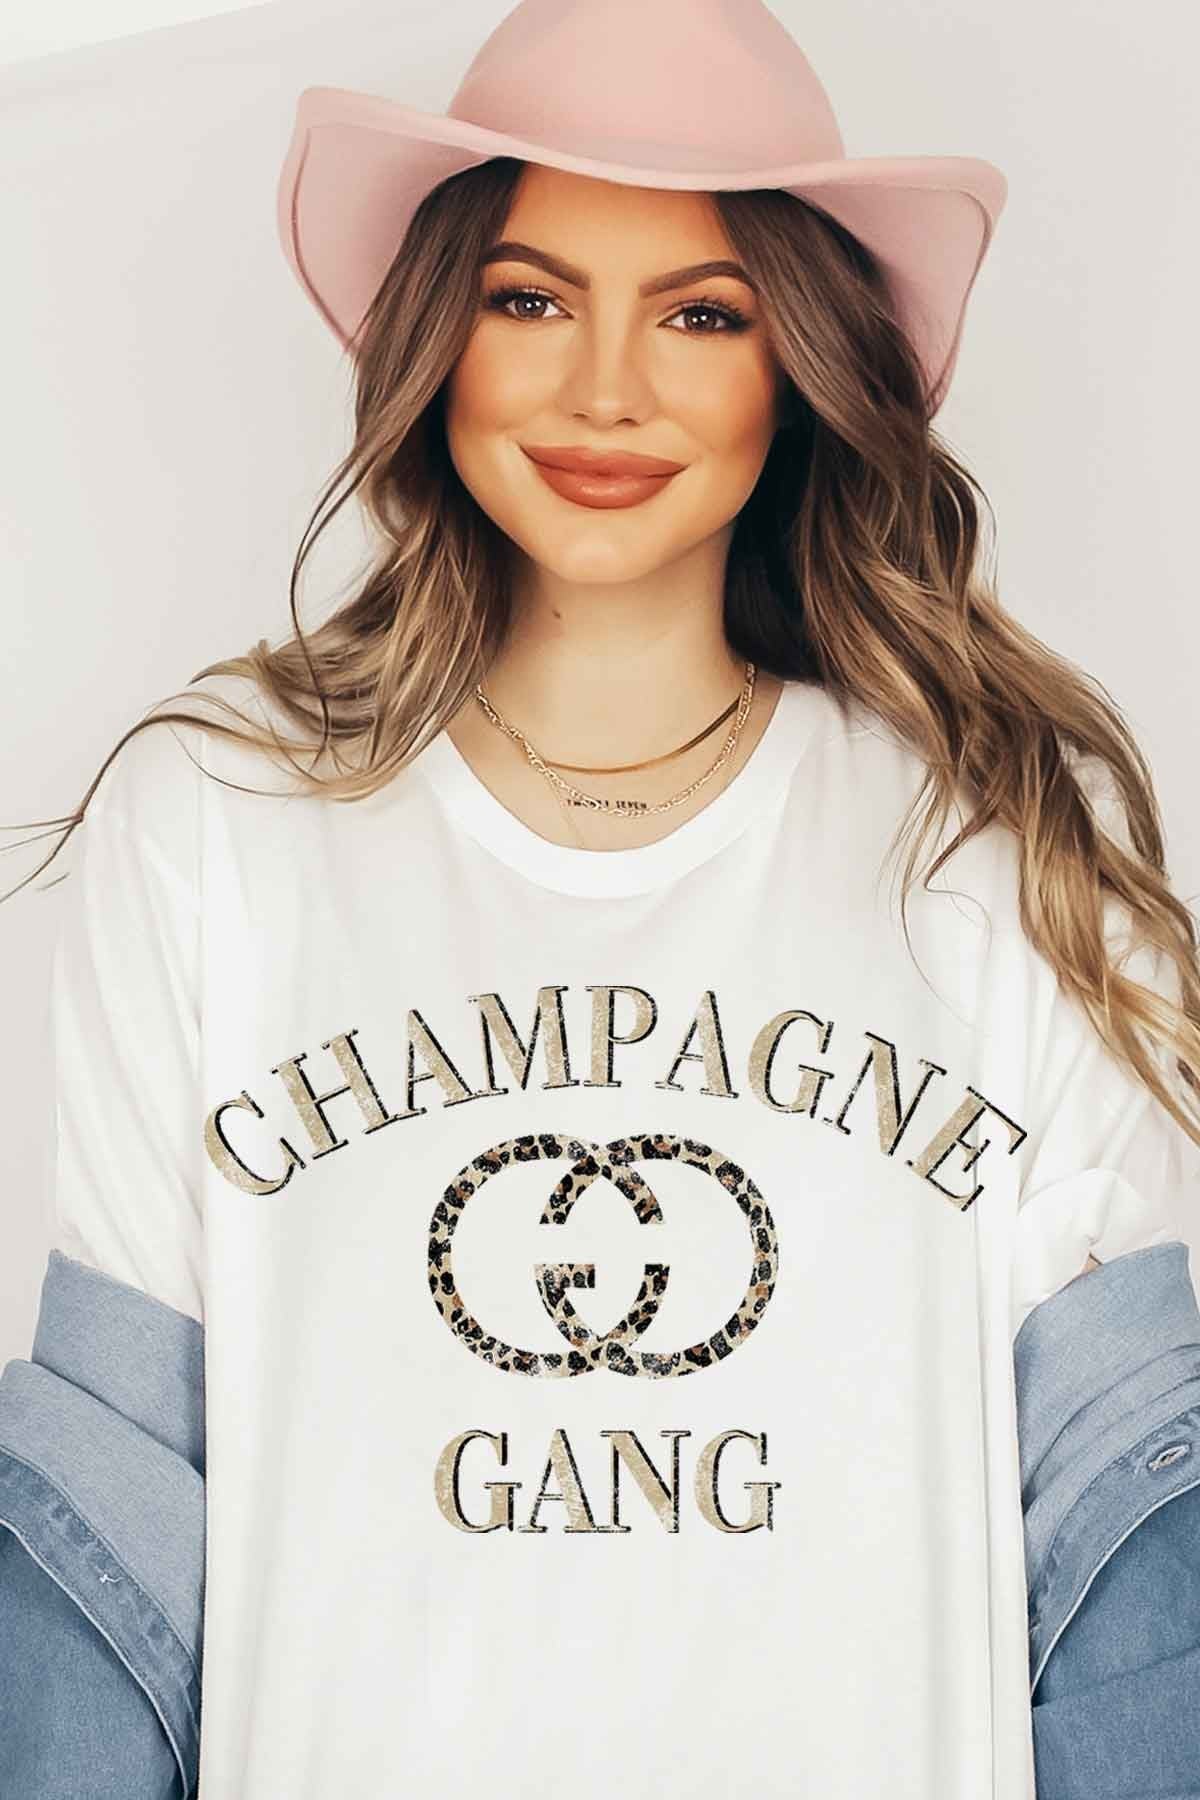 Champagne Gang Graphic Tee